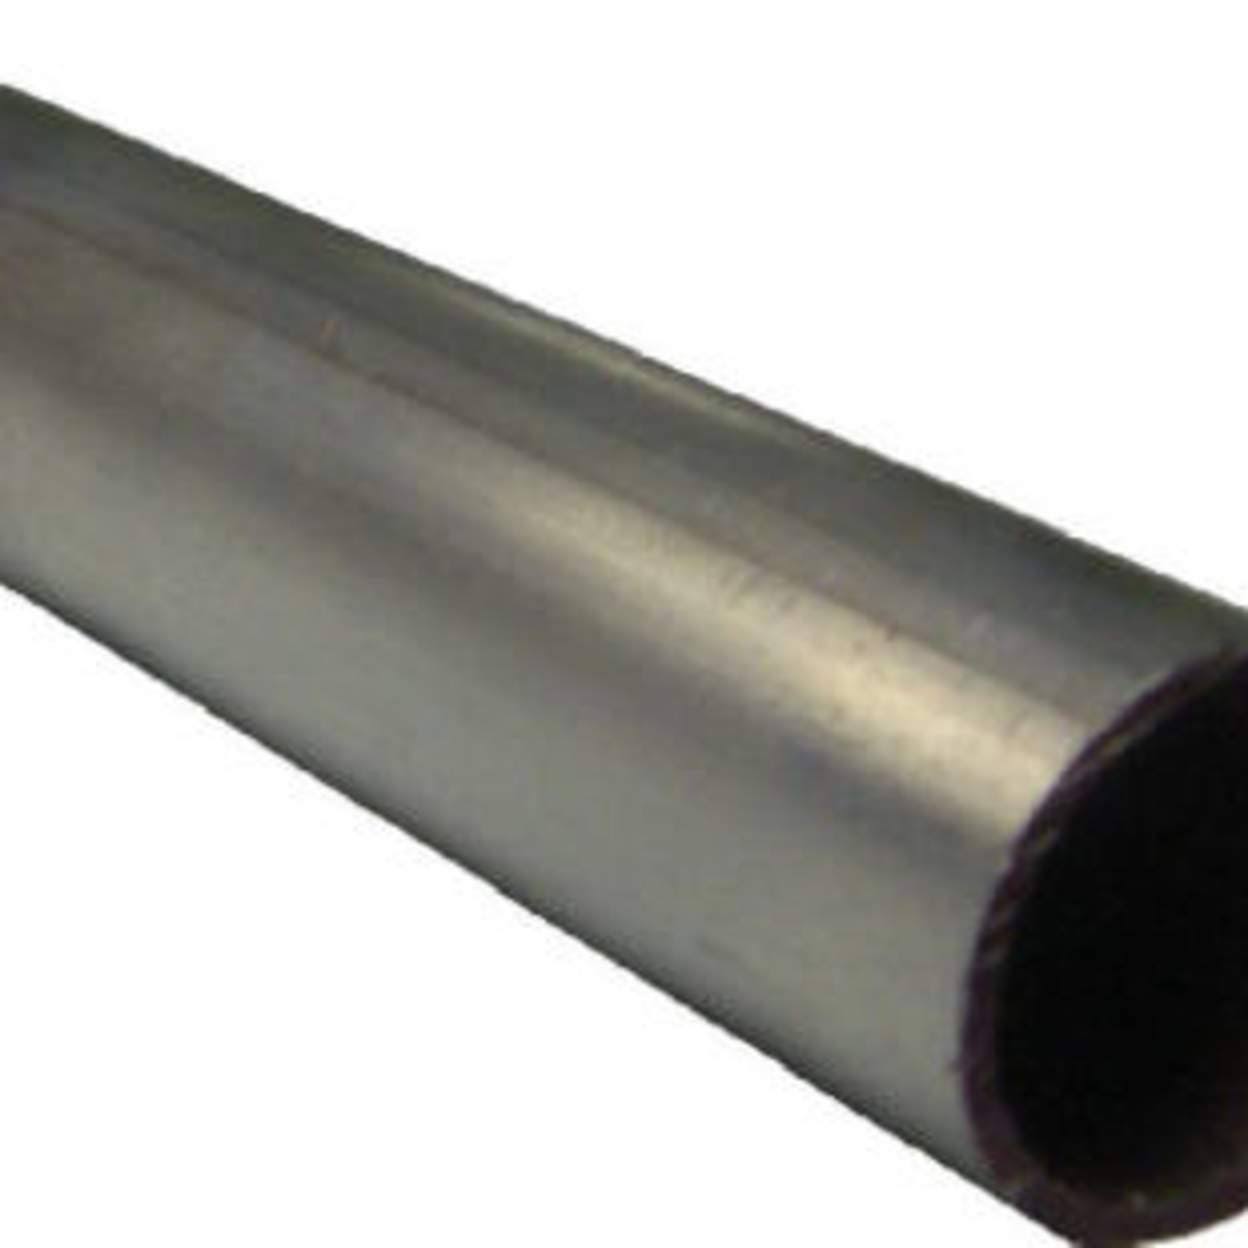 Steelworks Boltmaster 11397 Round Aluminium Tube, 1.9cm x 90cm | Sports | Best Price Guarantee | Free Shipping On All Orders | Delivery Guaranteed